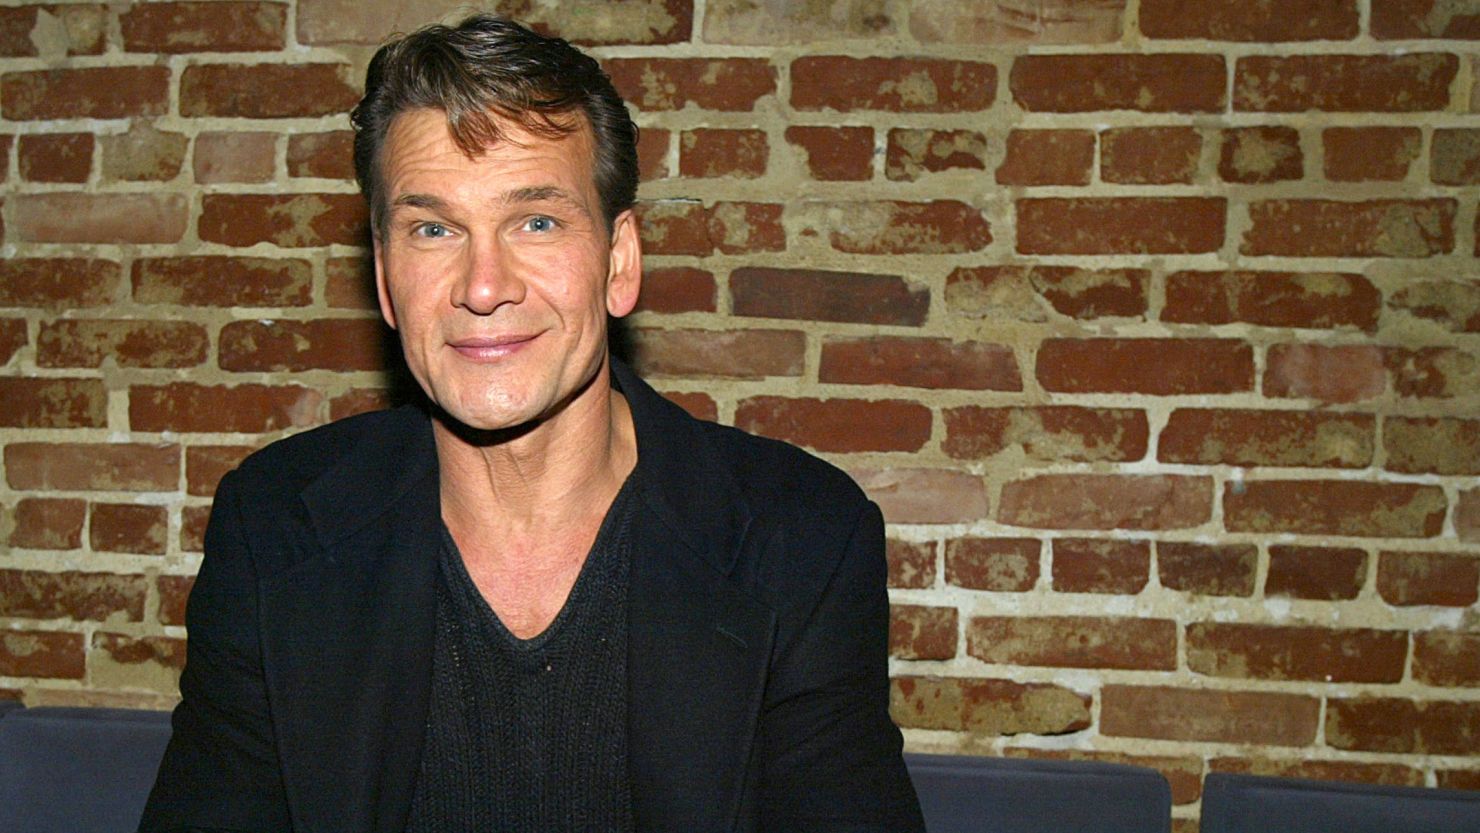 Patrick Swayze, seen here at the after-party for "Chicago - The Musical" in 2004, is remembered as fearless and complicated in 'I Am Patrick Swayze.' 